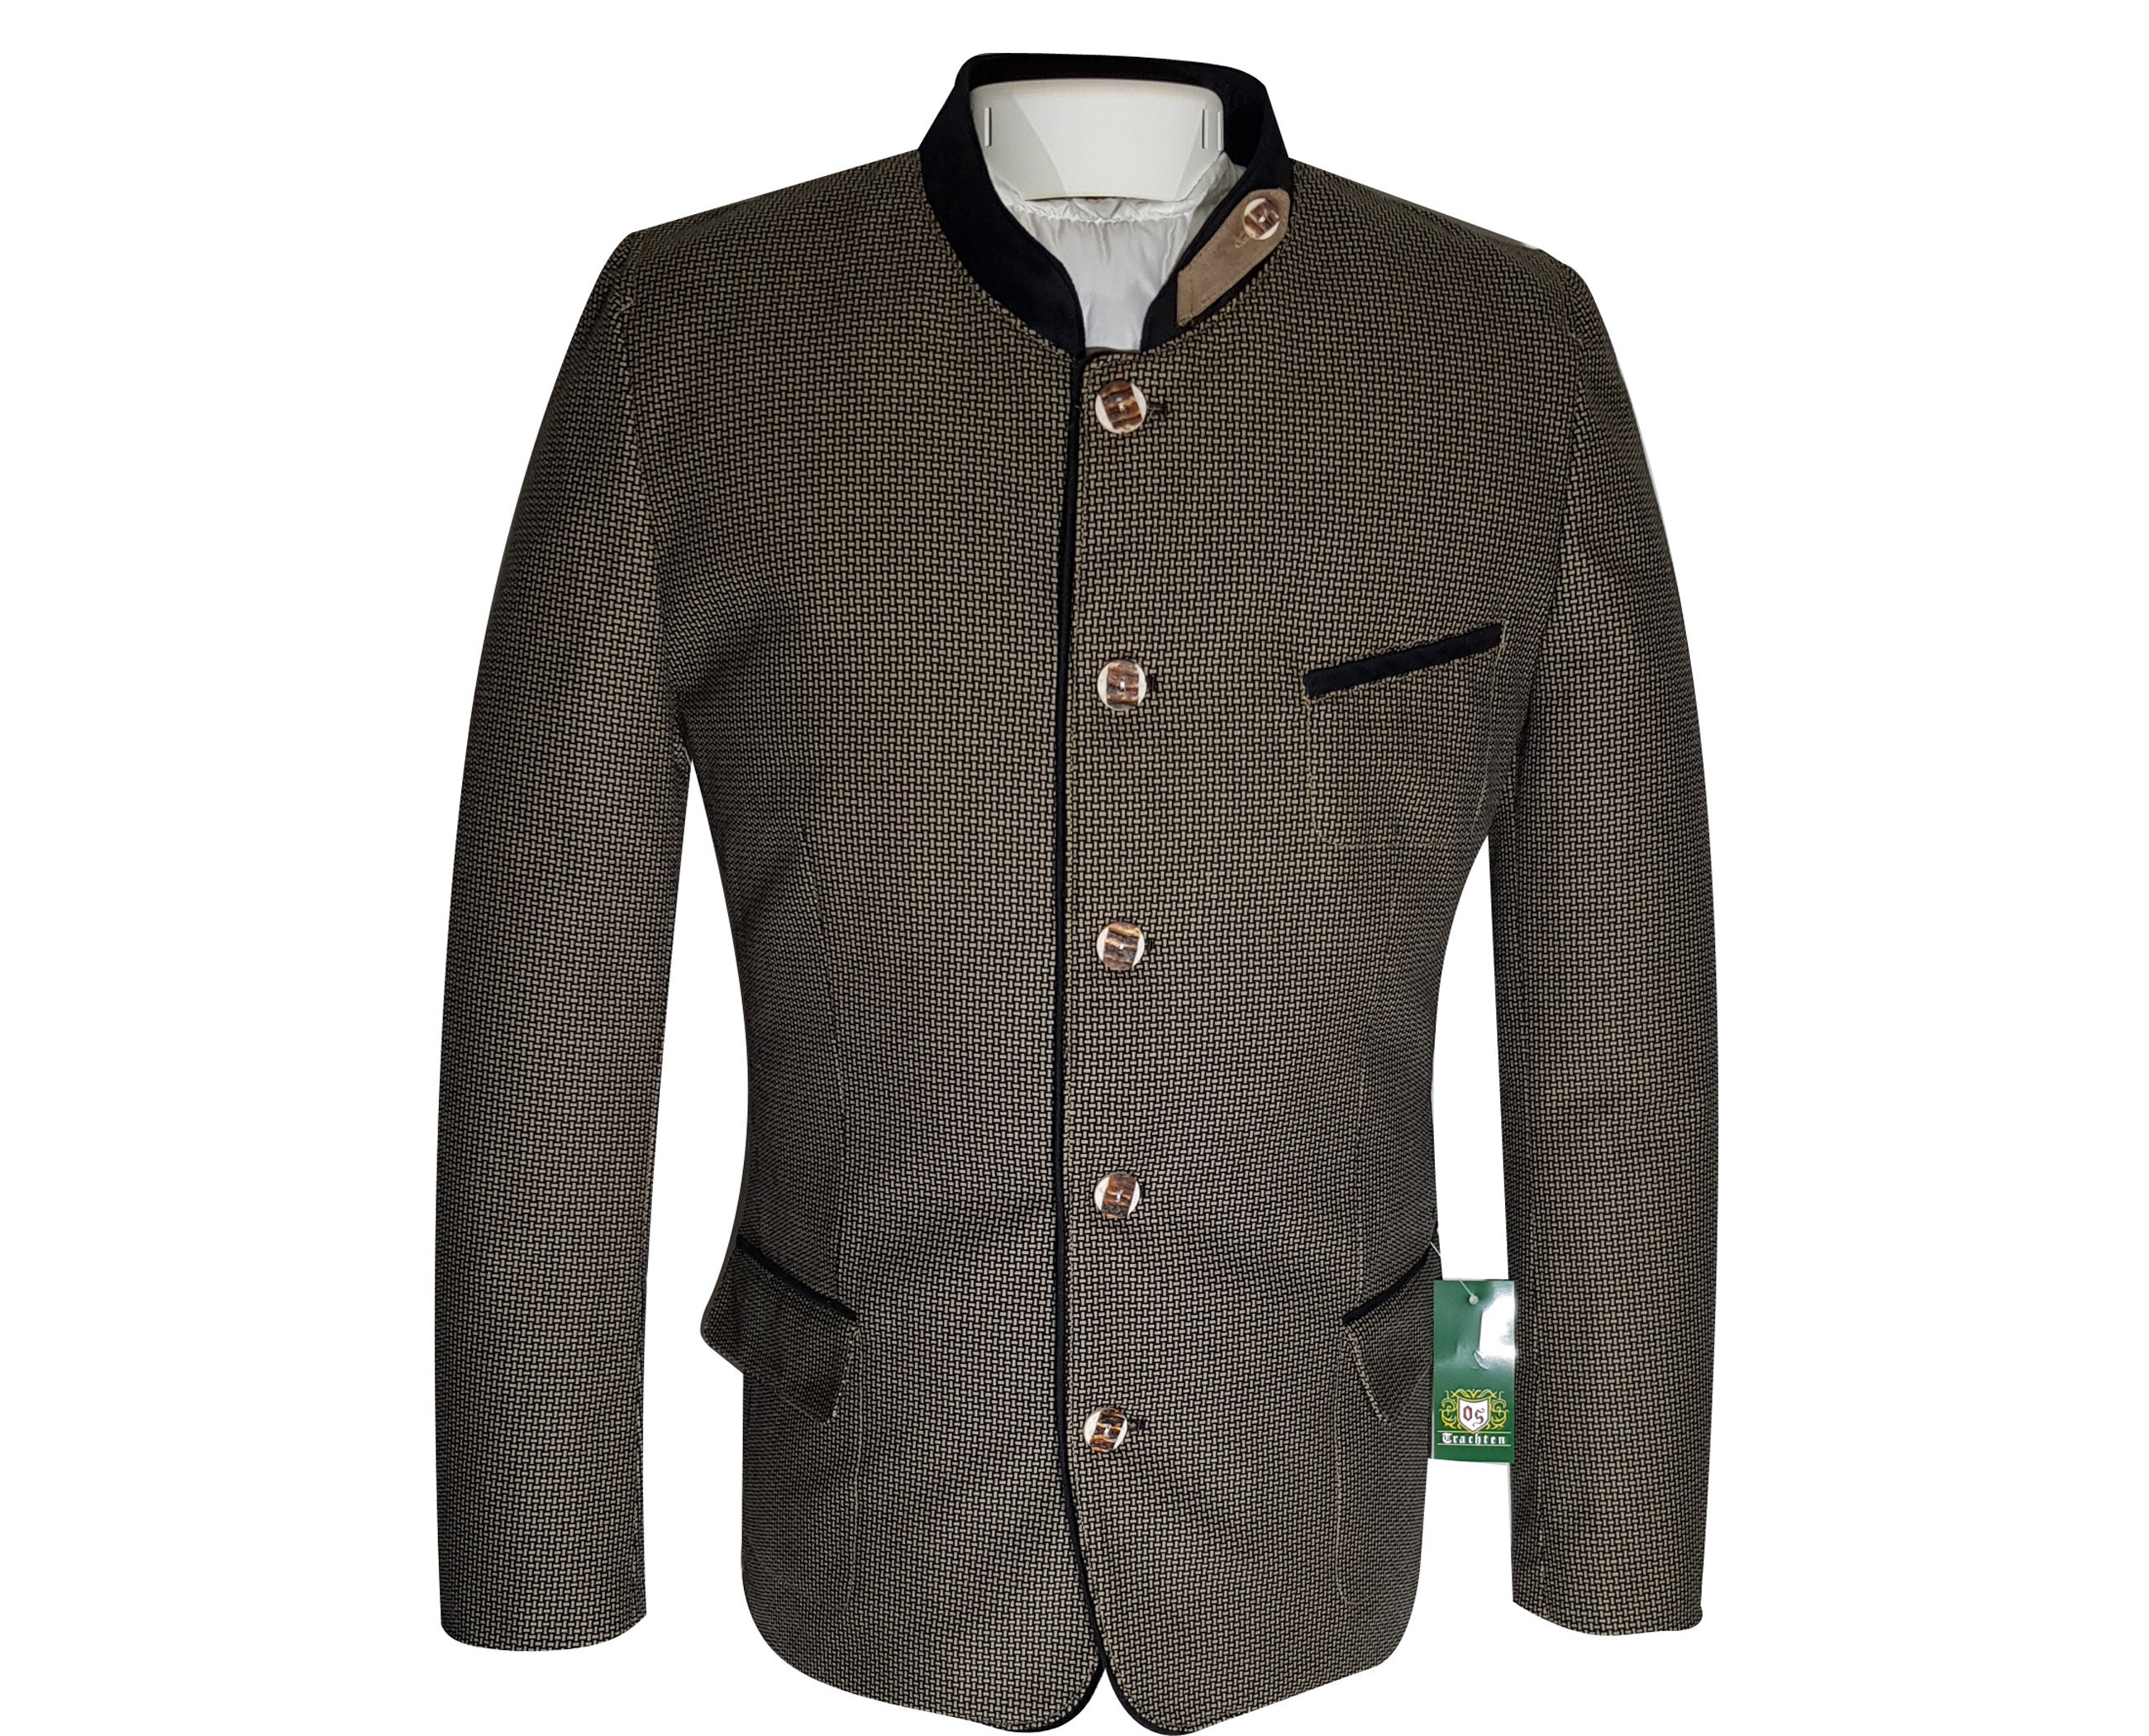 Men's Traditional Jacket of the Brand OS in New Style - Etsy